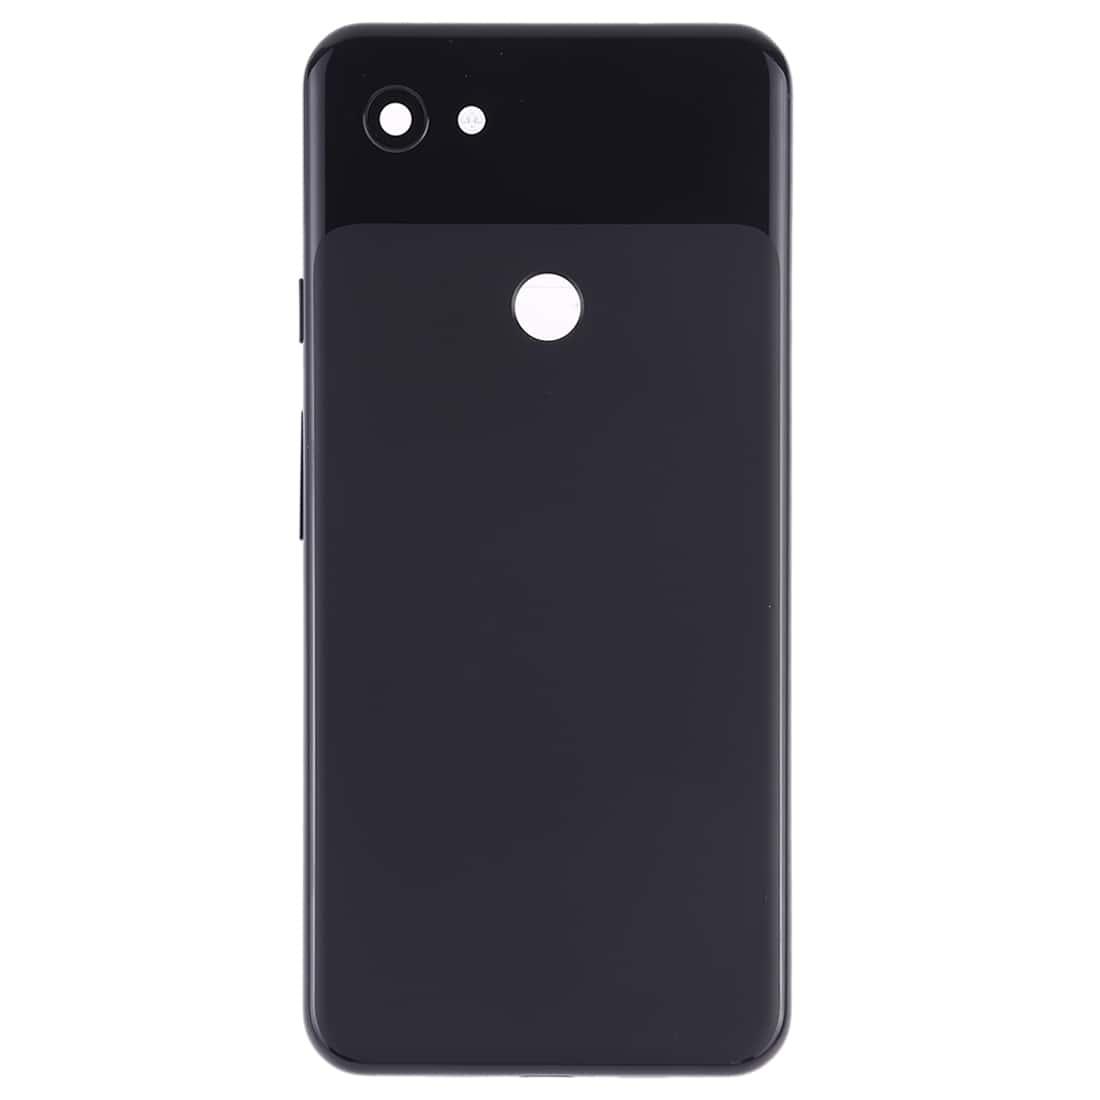 Back Glass Panel for Google Pixel 3A XL Black with Camera Lens